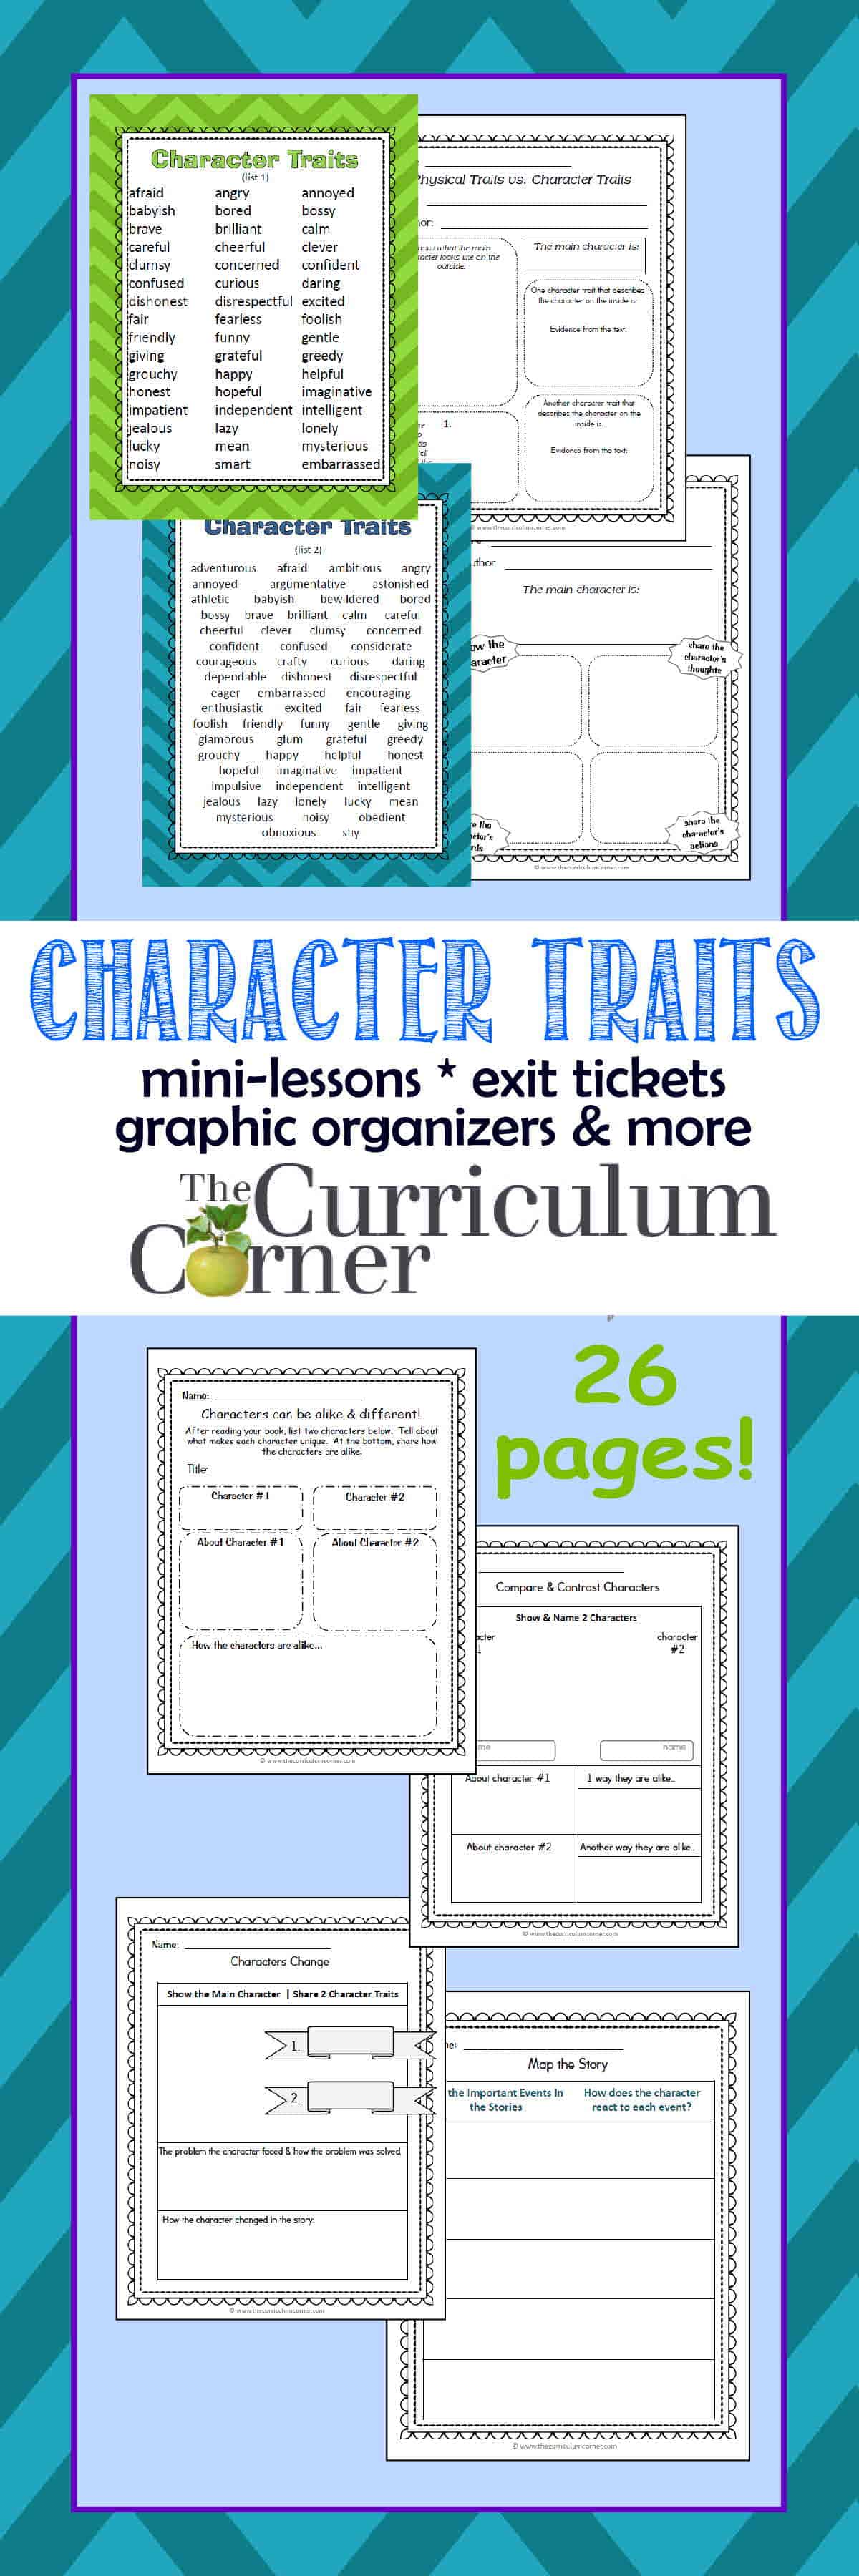 character traits resources